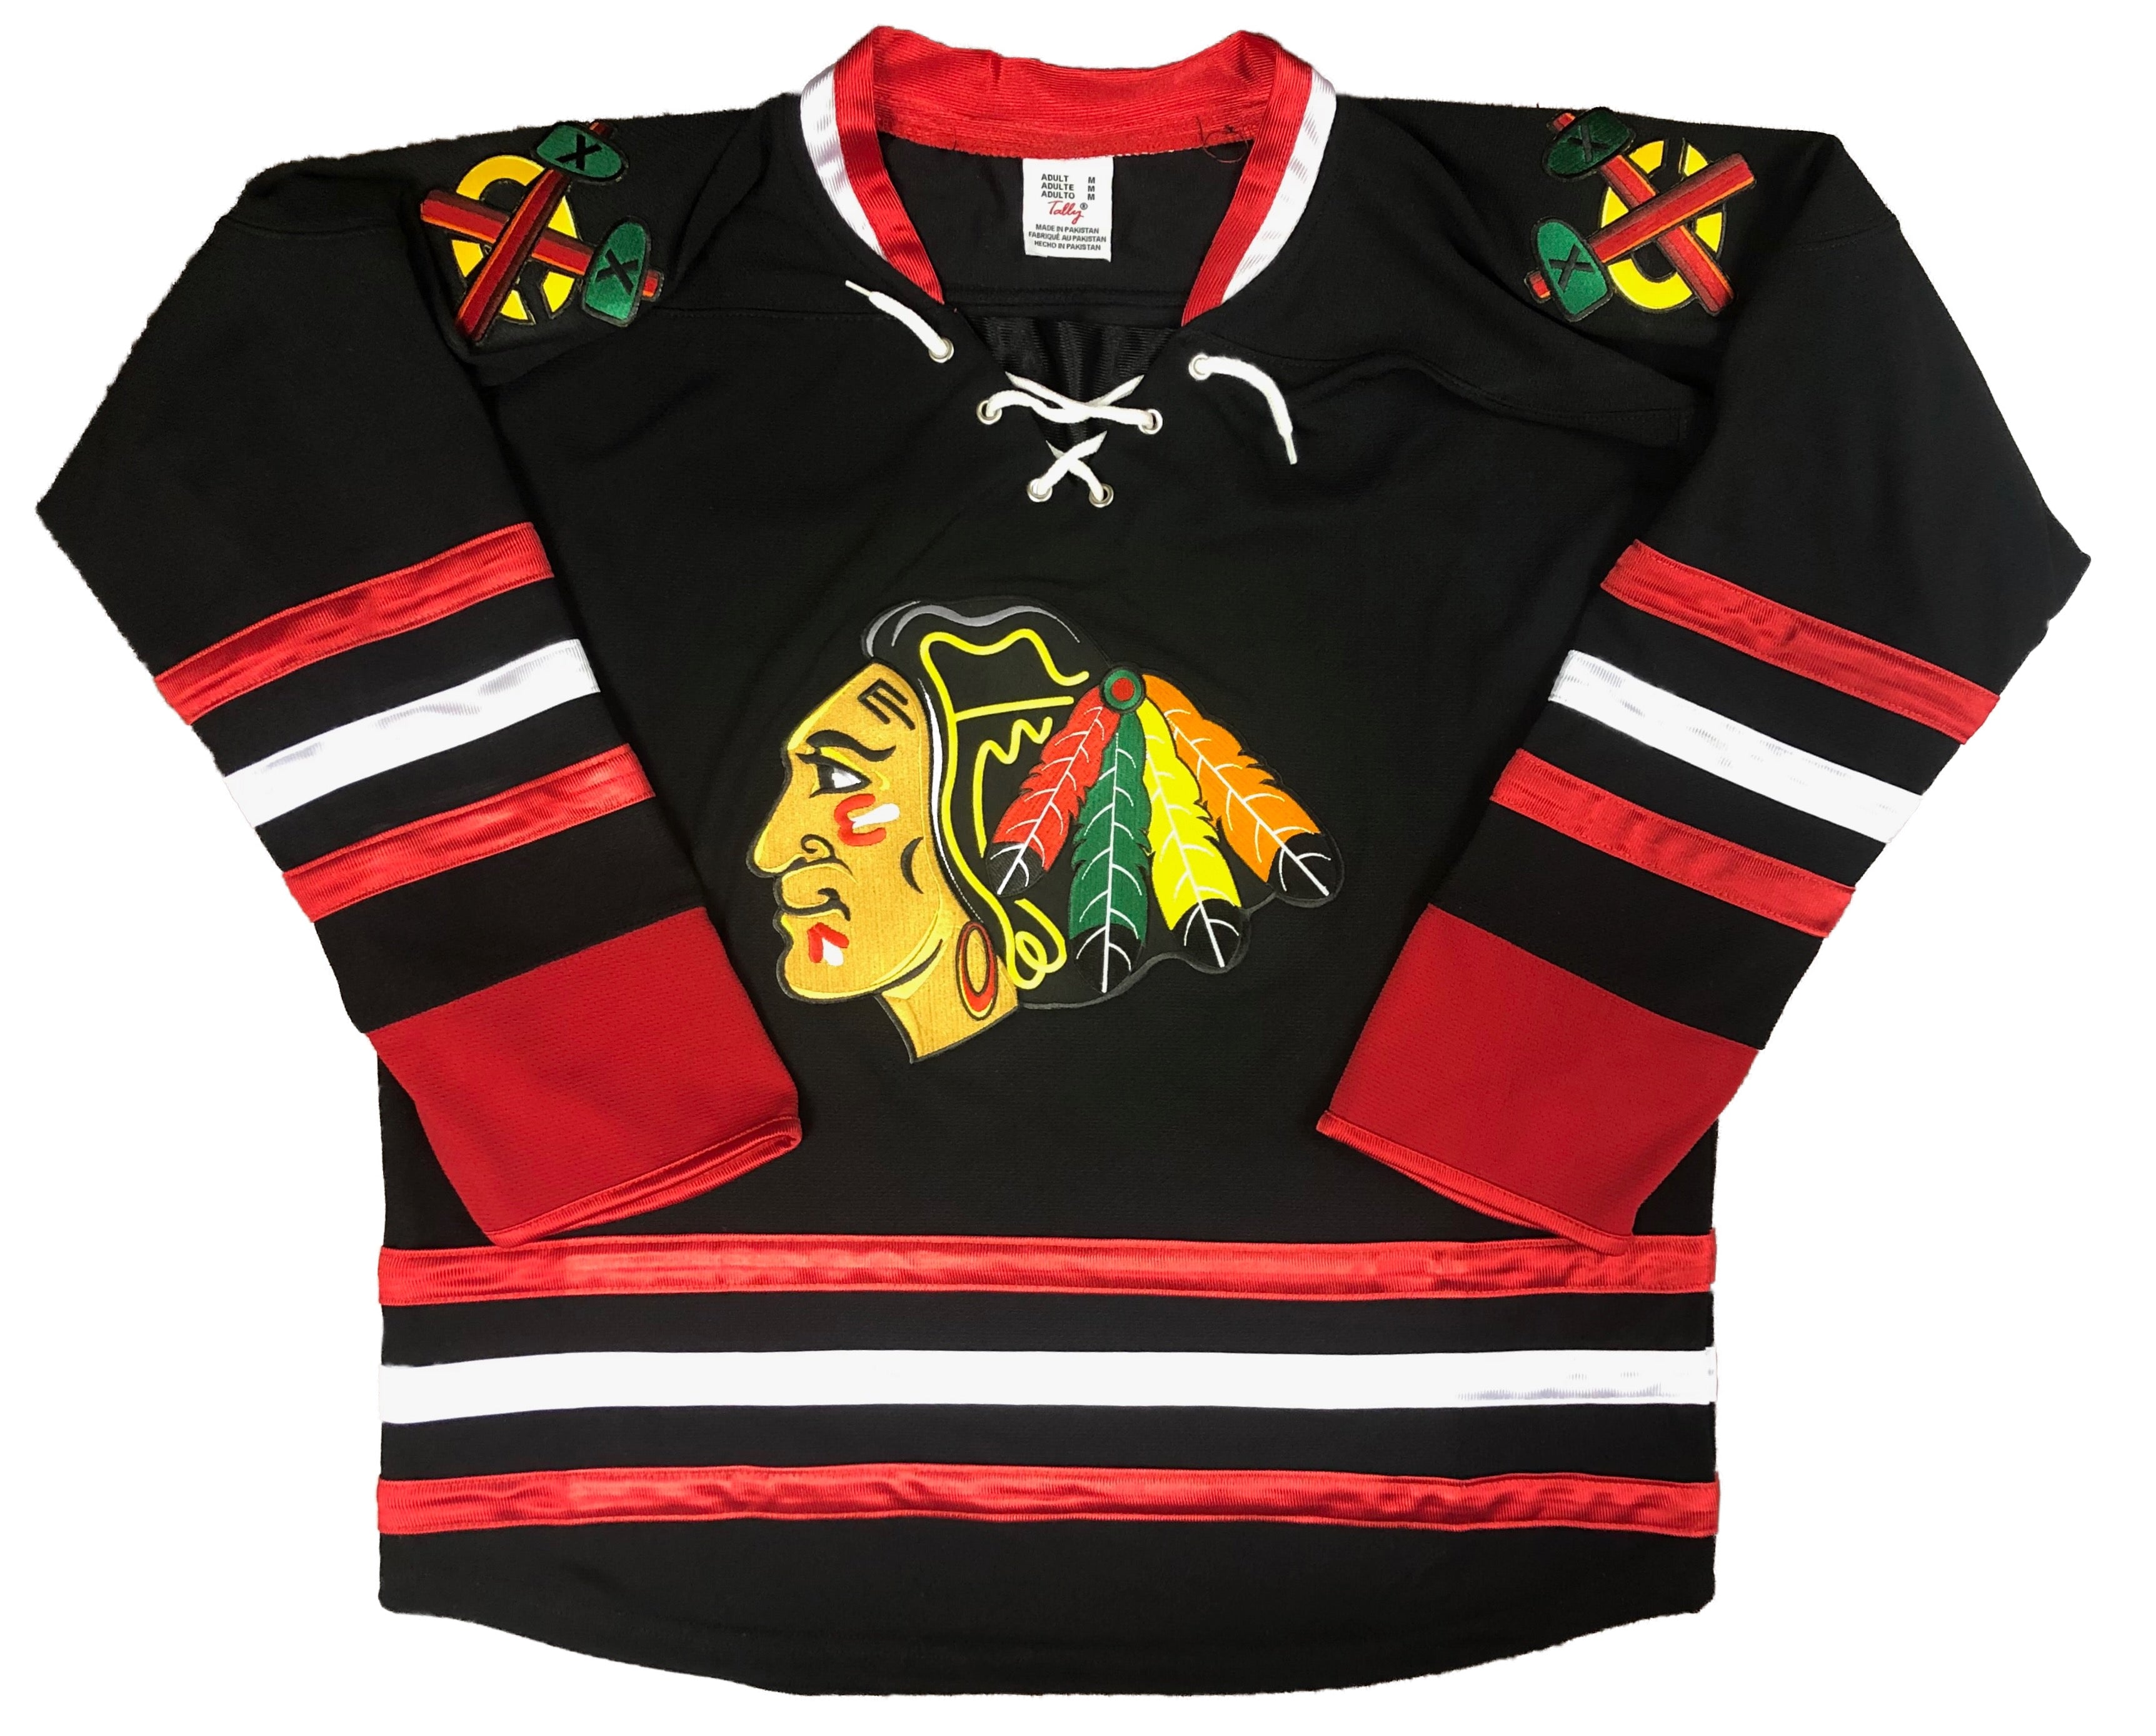 Blackhawks official patch jersey